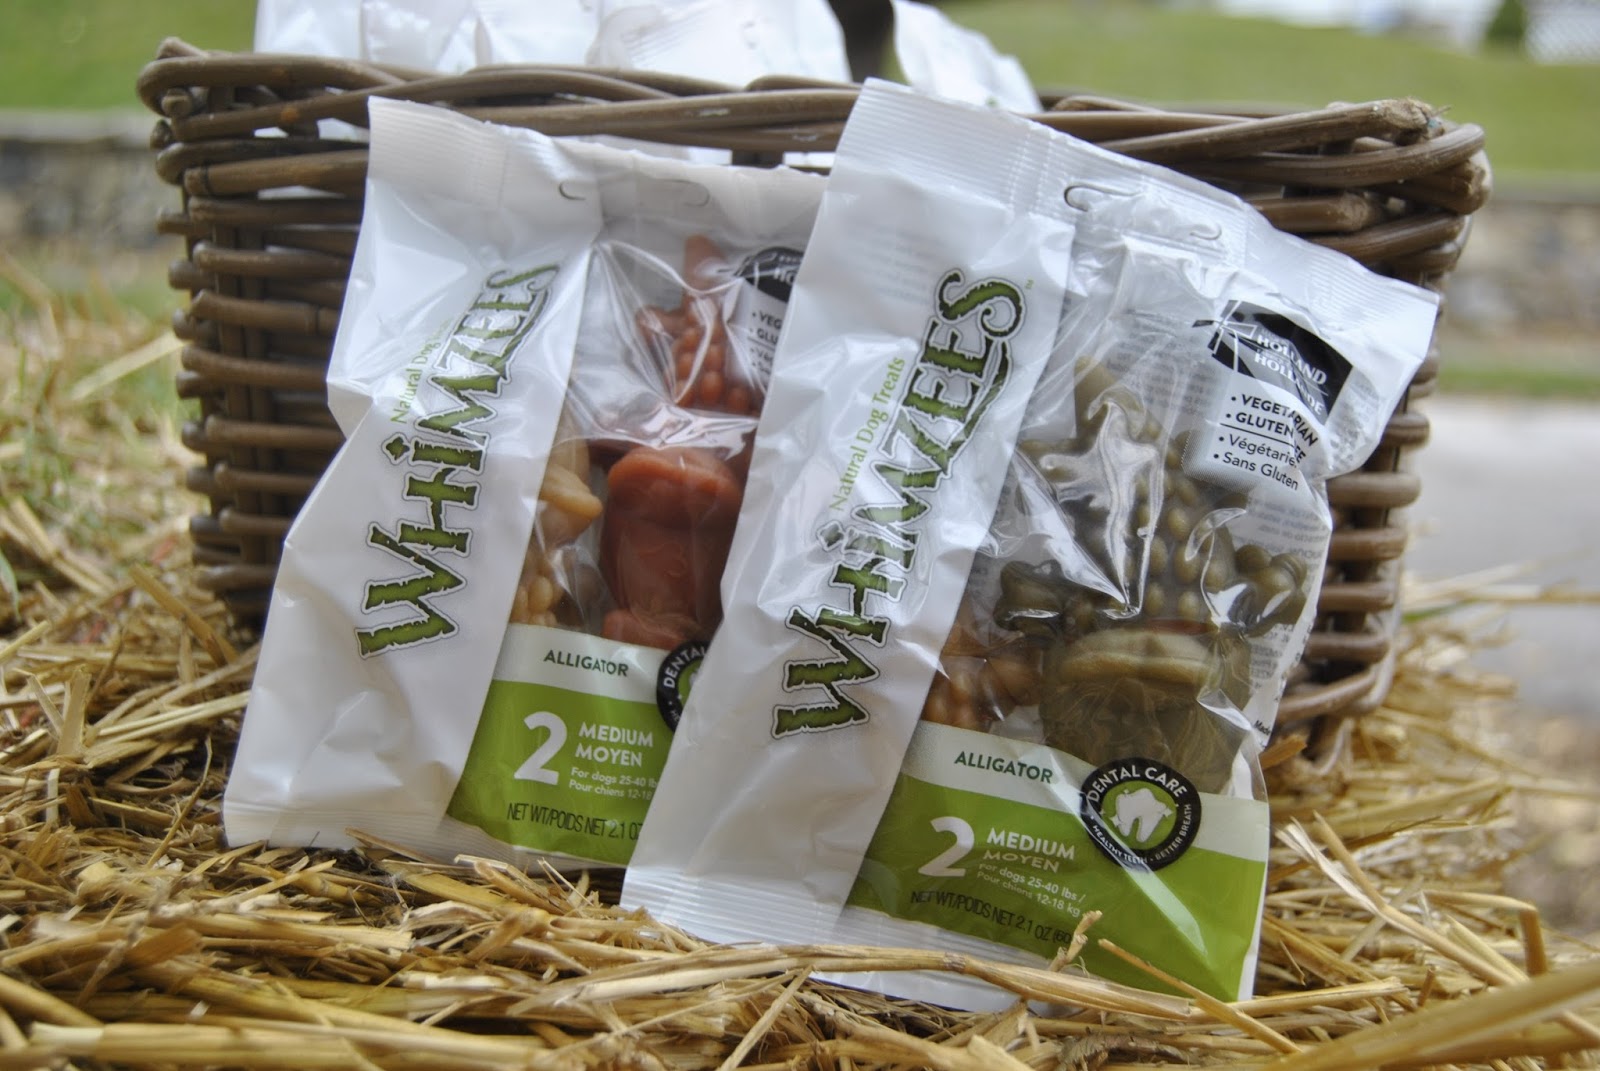 Whimzees Natural Dog Treats - Our Favorites! - Wishing Penny